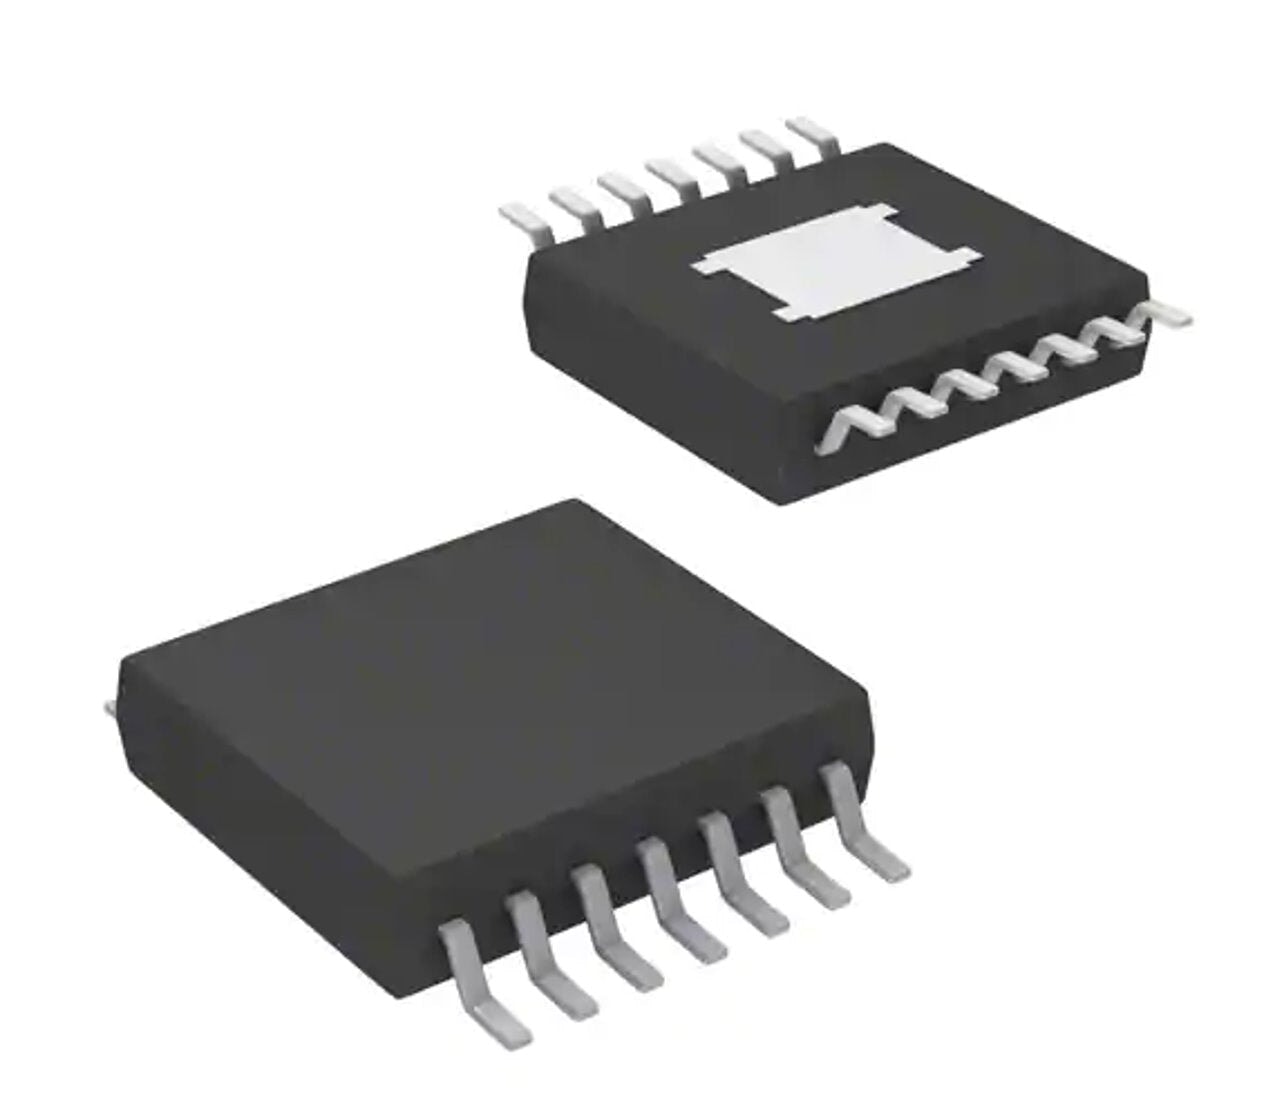 Infineon Technologies Touch Screen Controllers Part #CY8CPLC20-48LTXIT | Controller | DEX Information Technology Infineon Technologies 